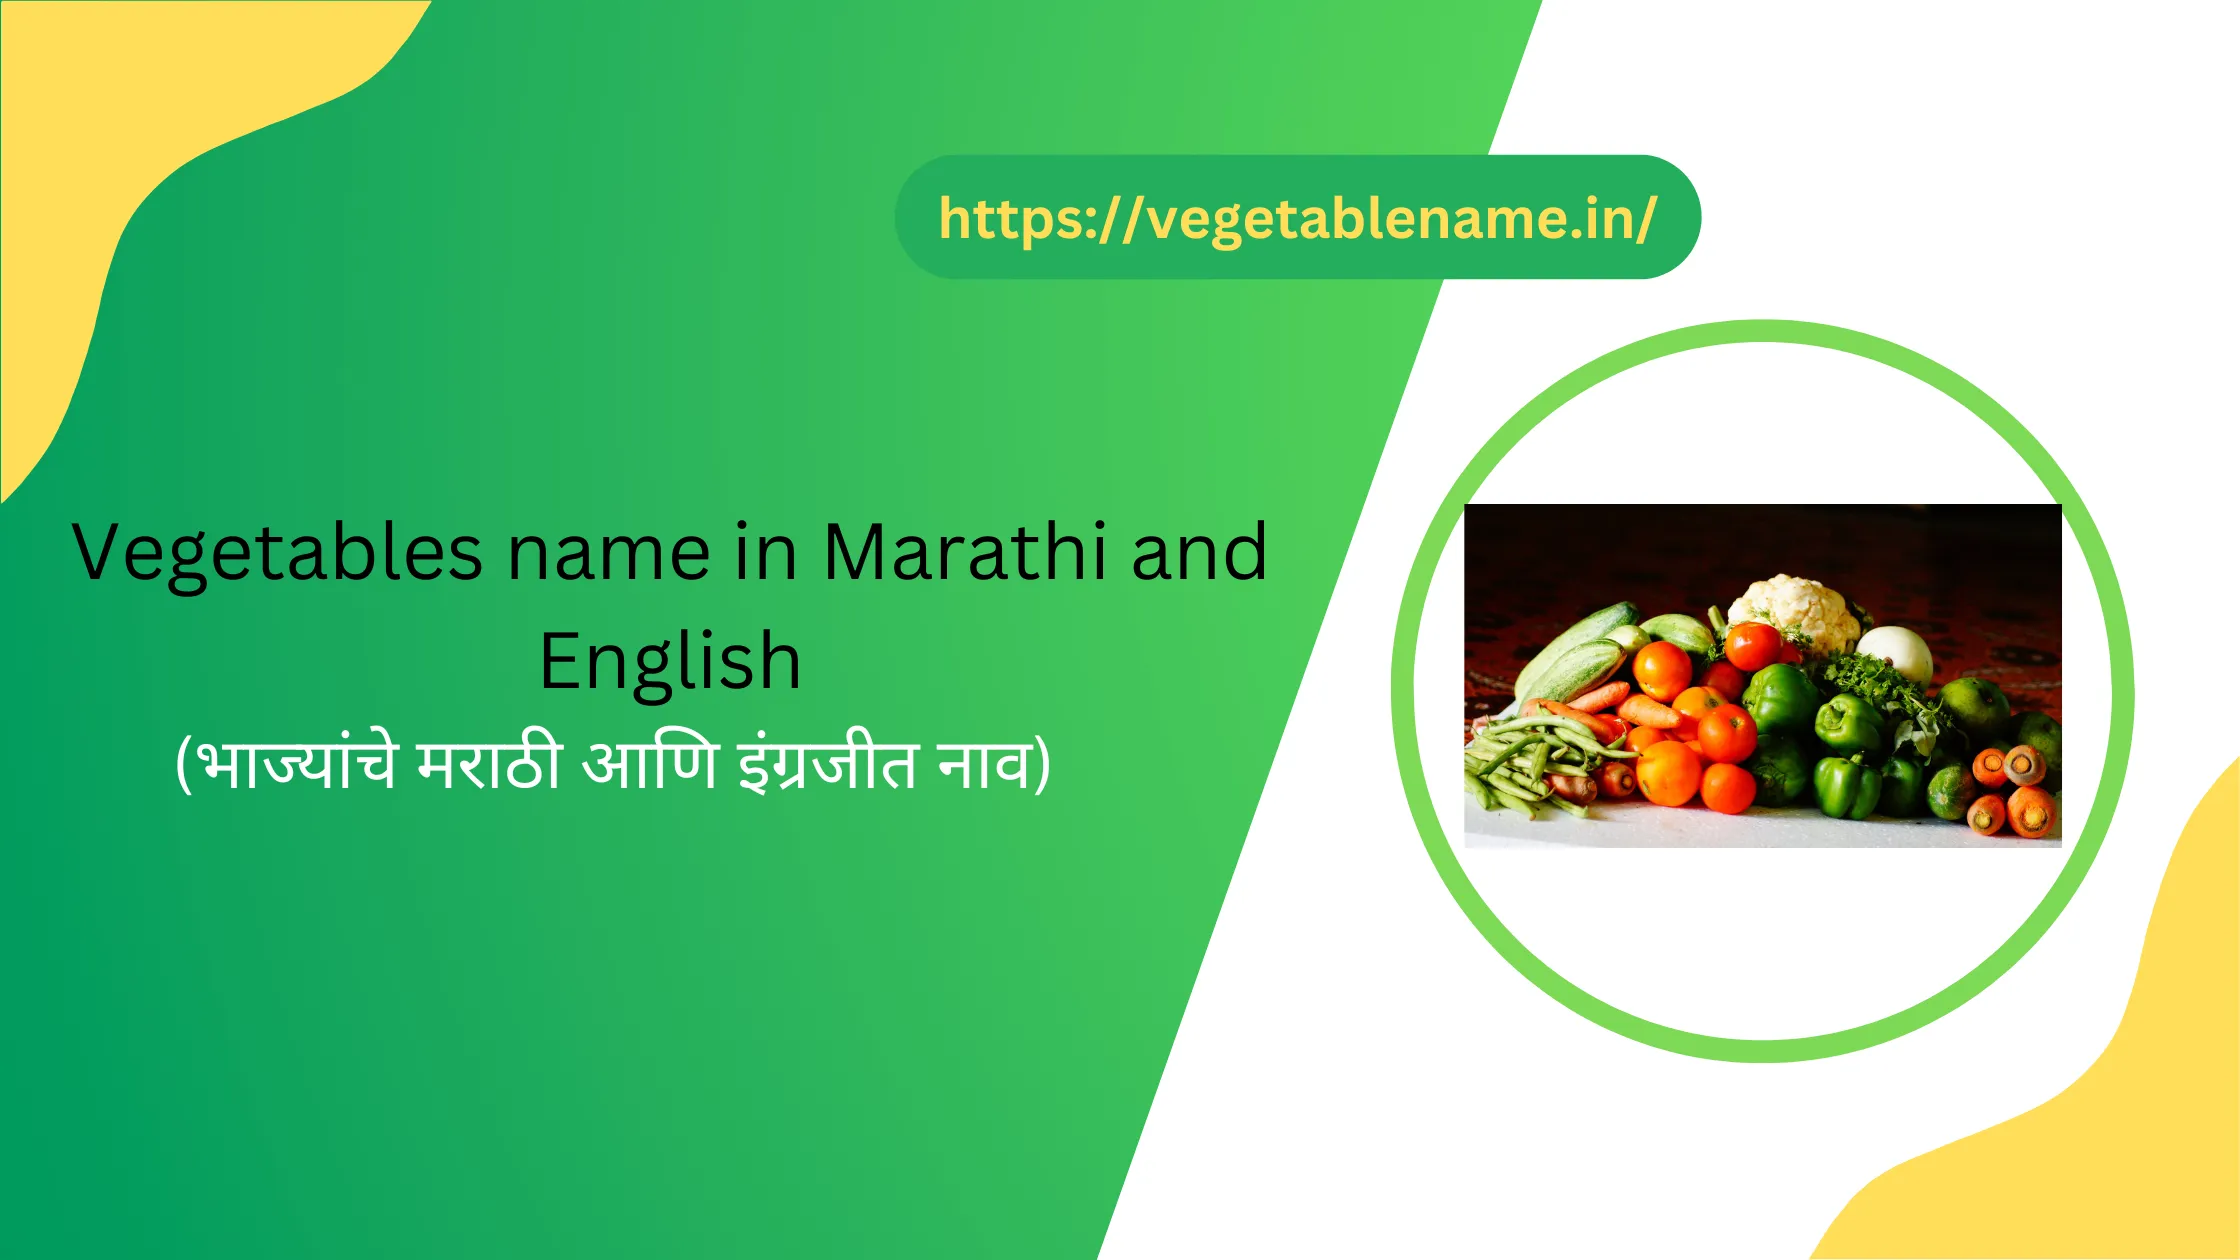 Vegetables name in Marathi and English